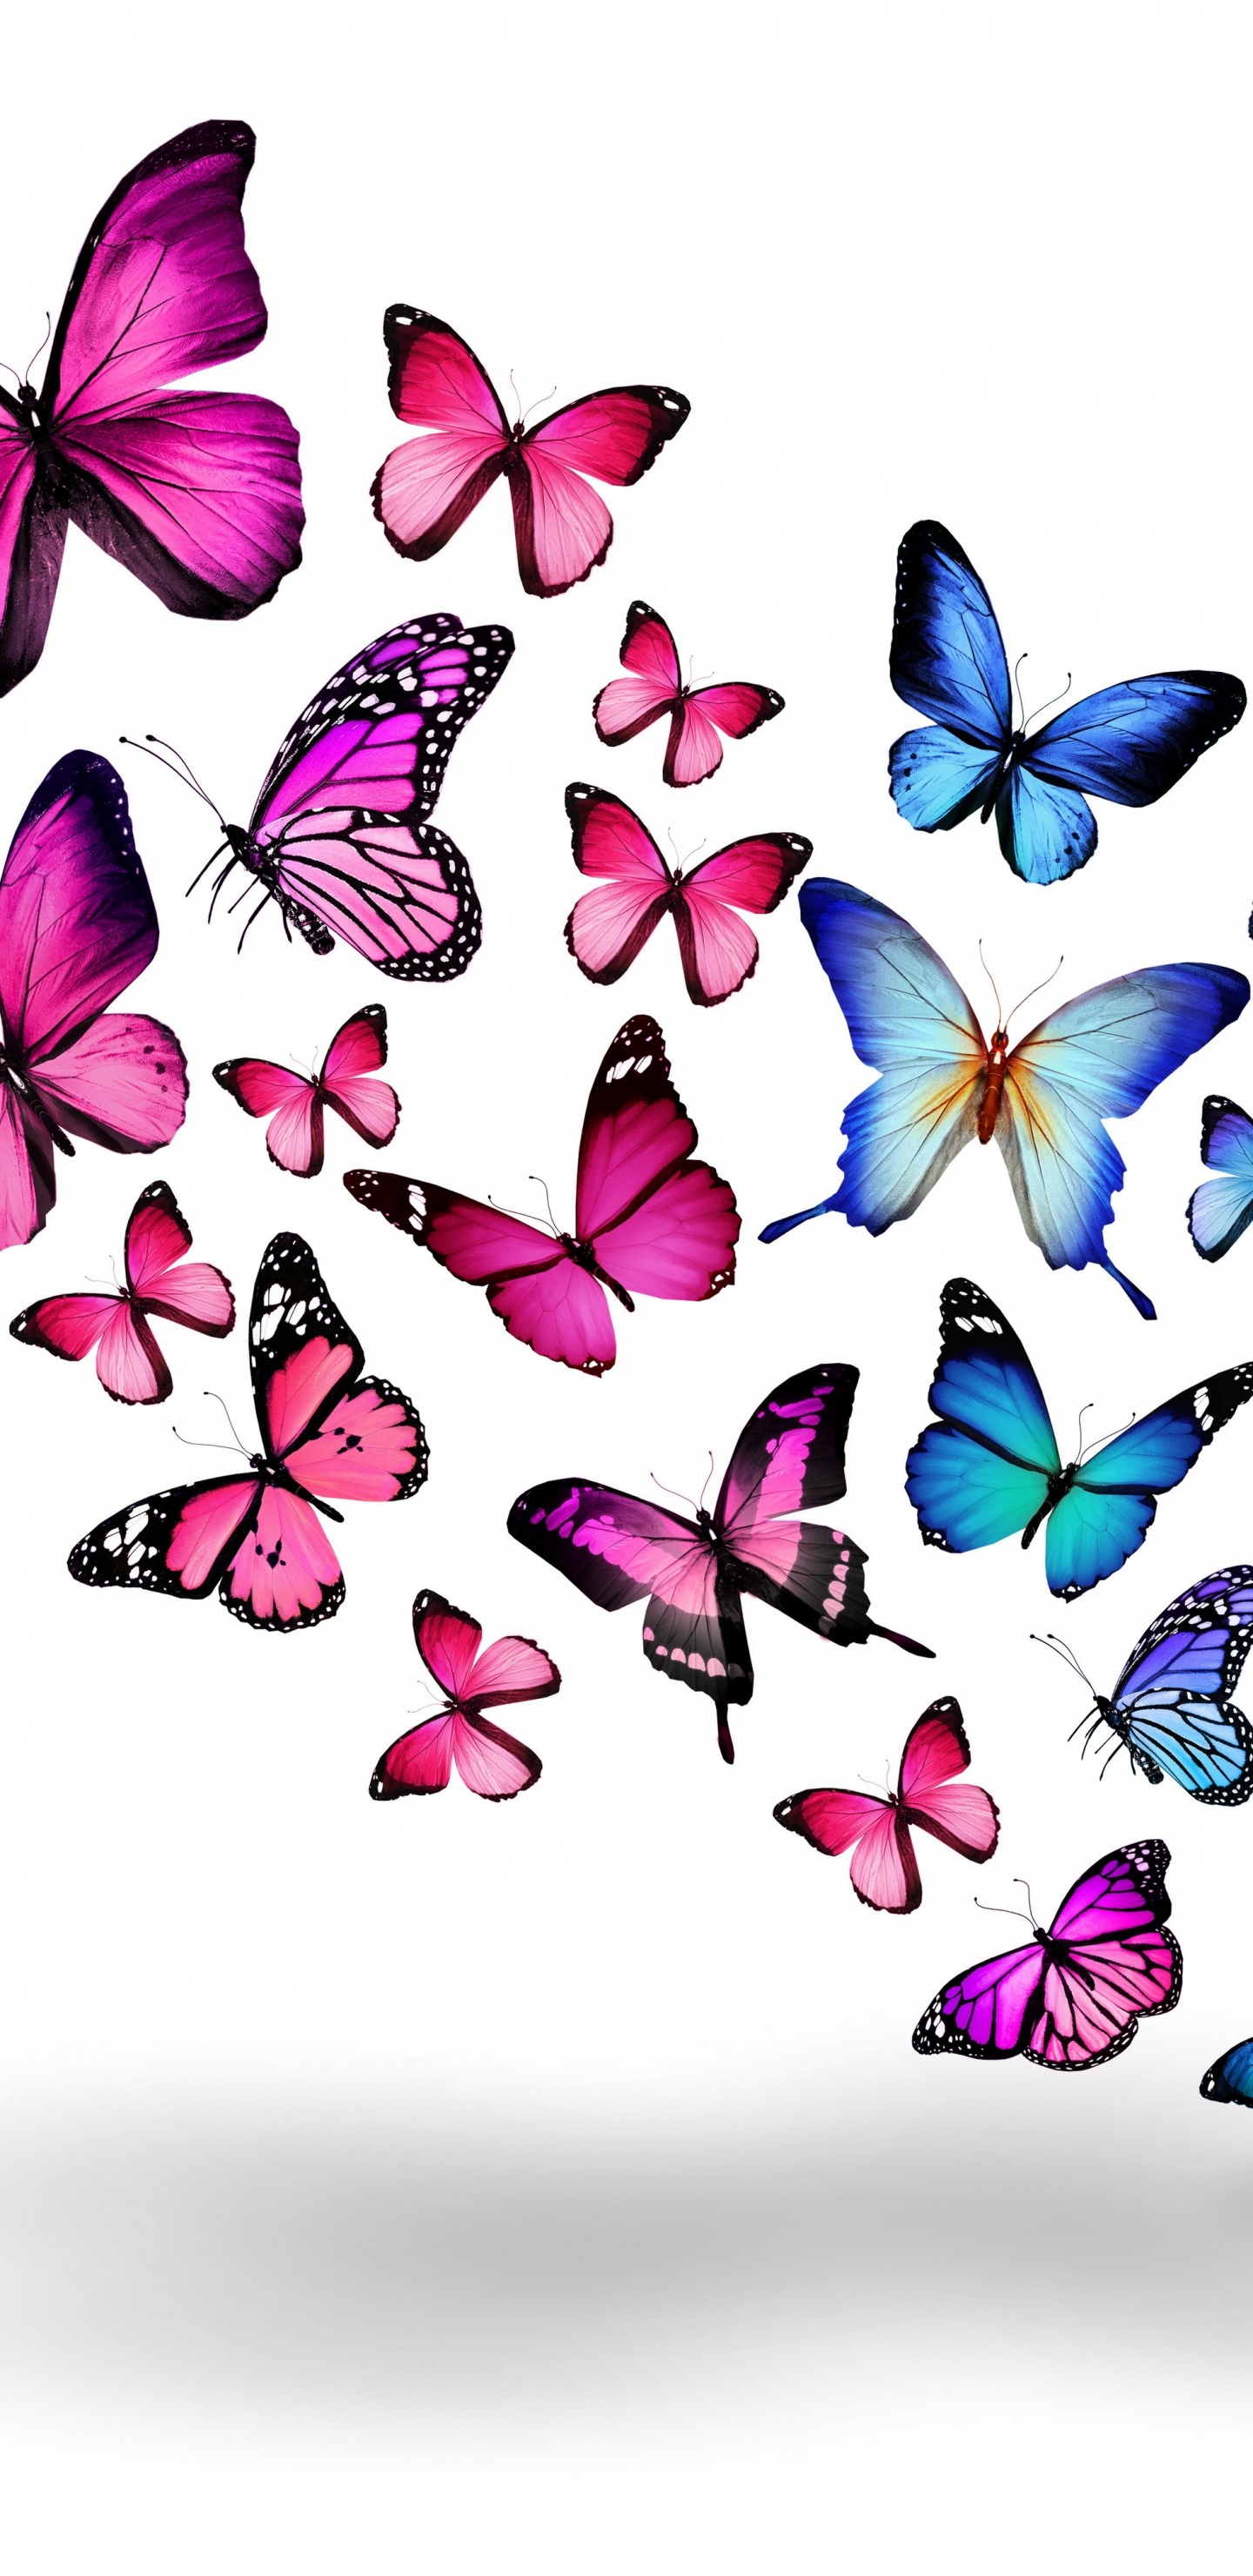 Blue and Purple Butterflies on White Background. Wallpaper in 1440x2960 Resolution